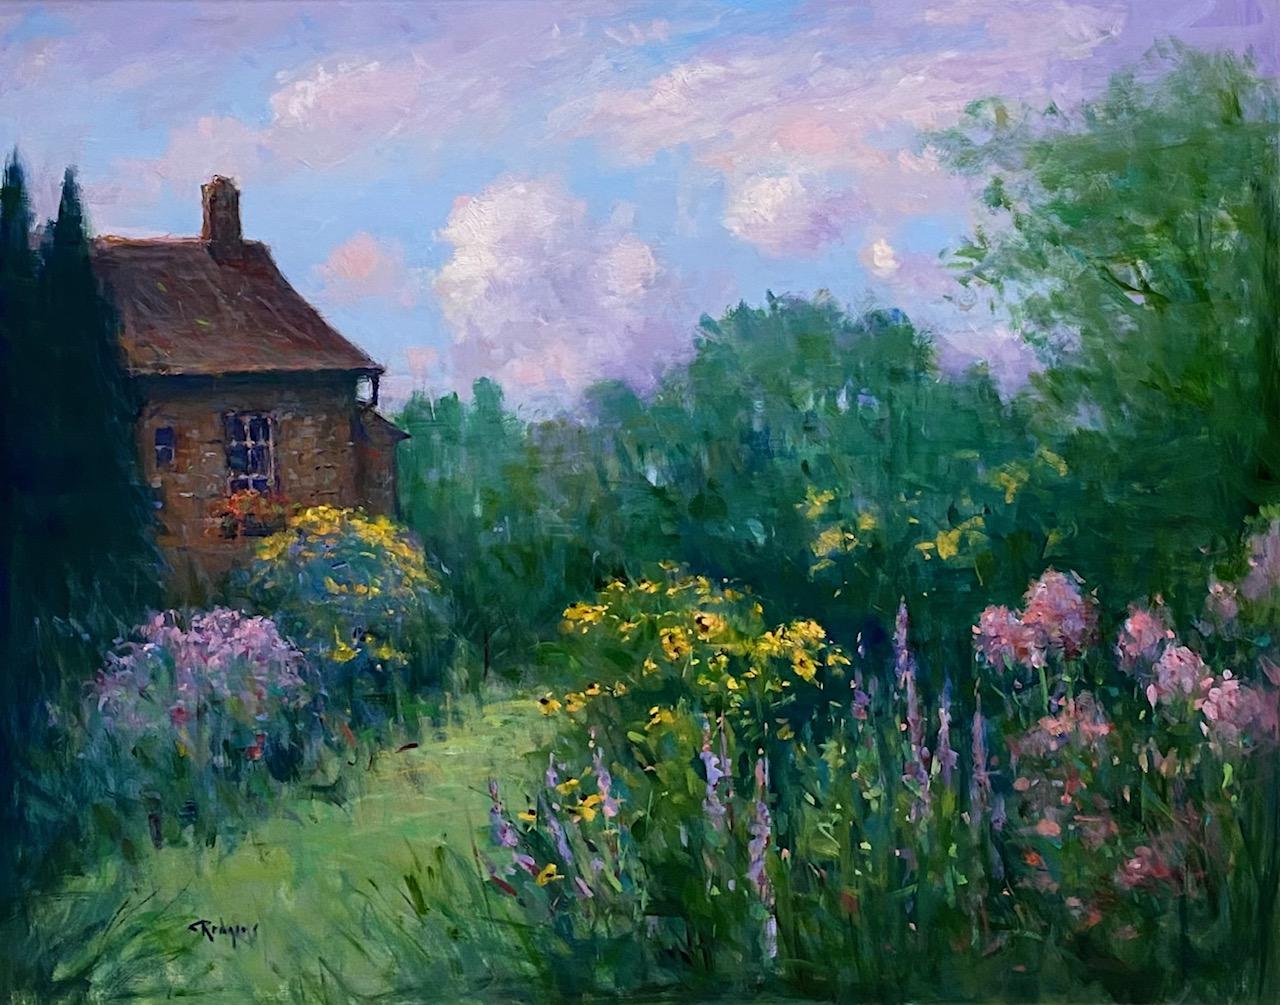 English Garden, original 24x30 impressionist landscape - Painting by Jim Rodgers